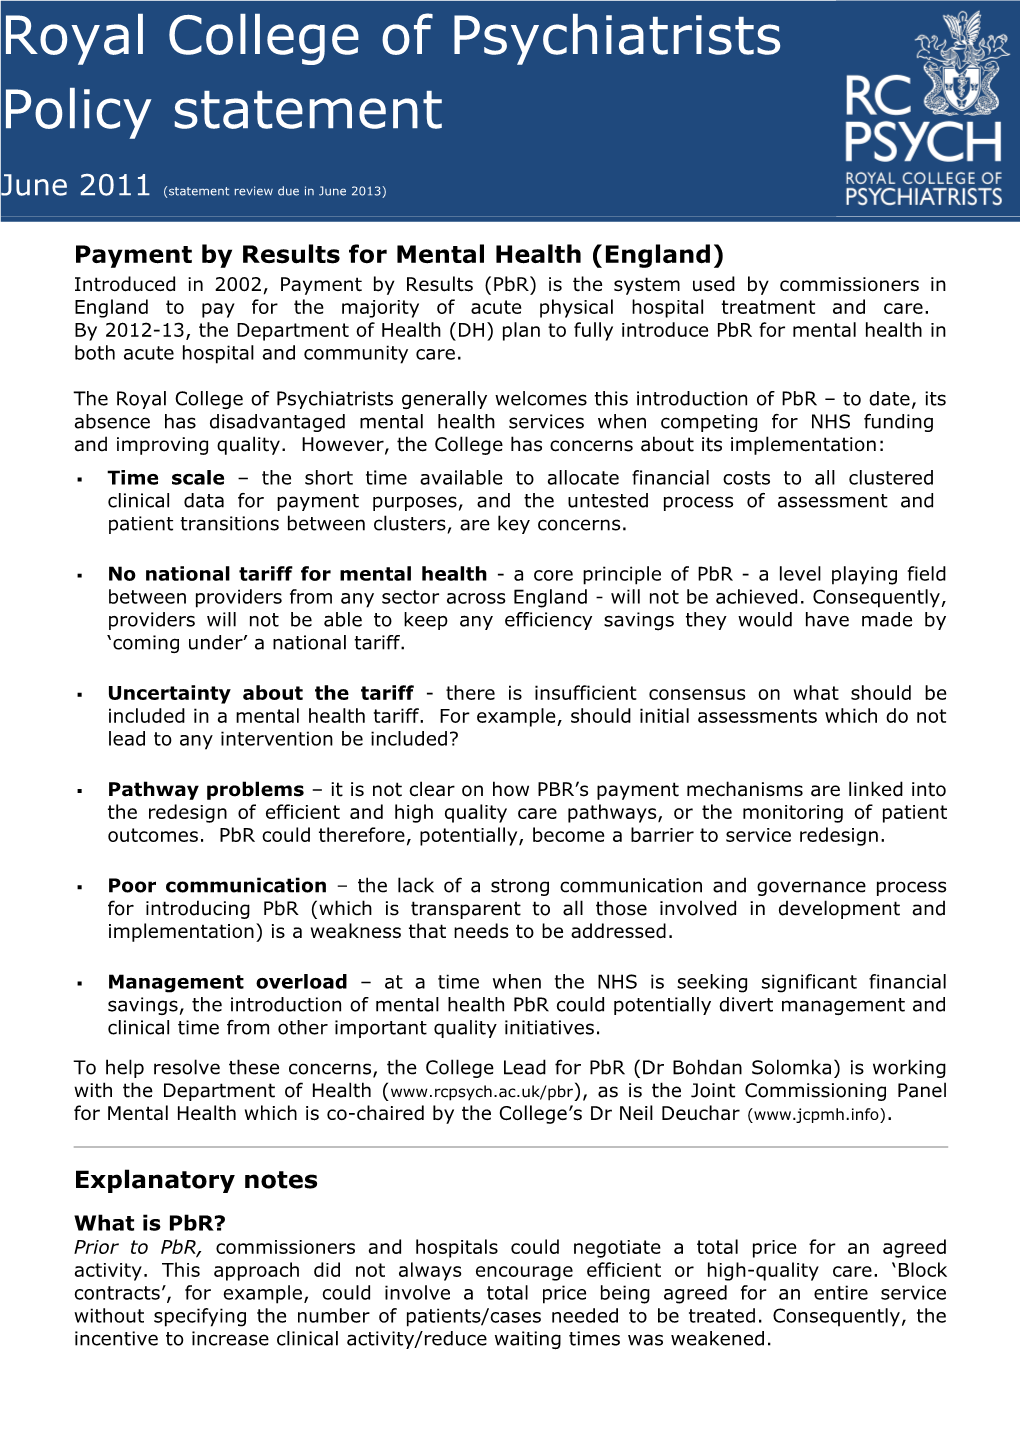 Payment by Results for Mental Health (England)